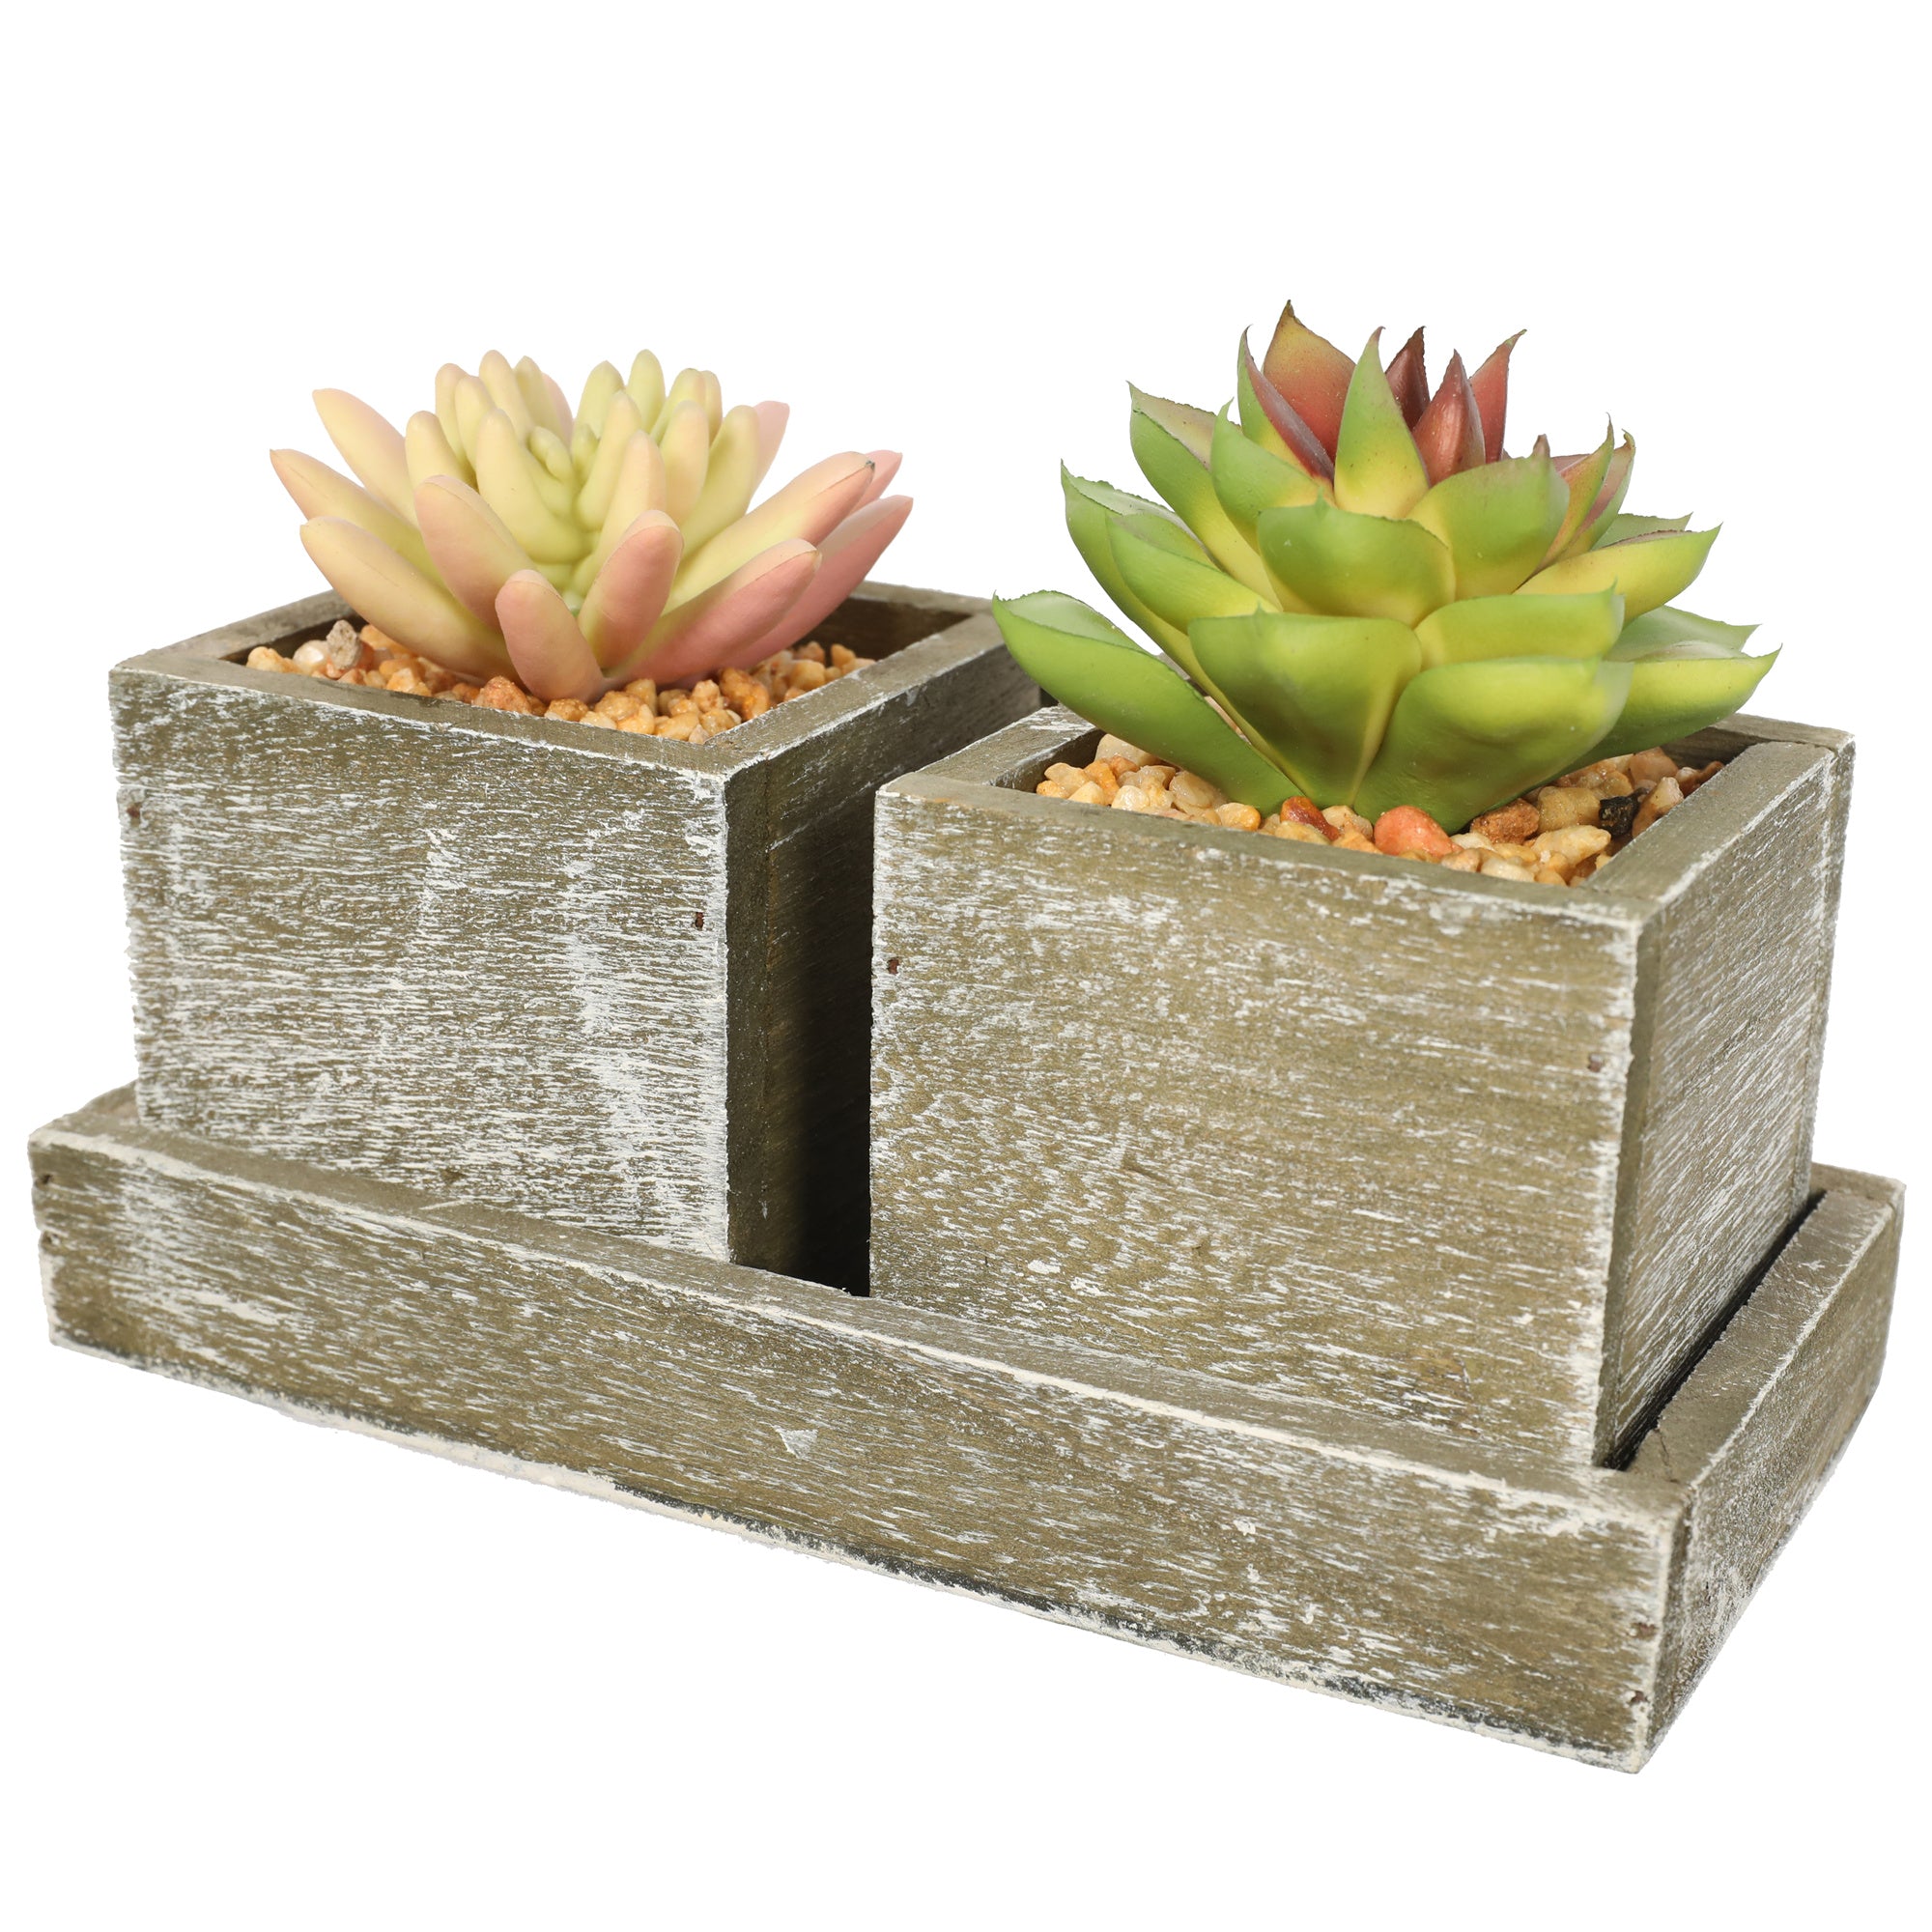 Double Succulent plant in wooden box